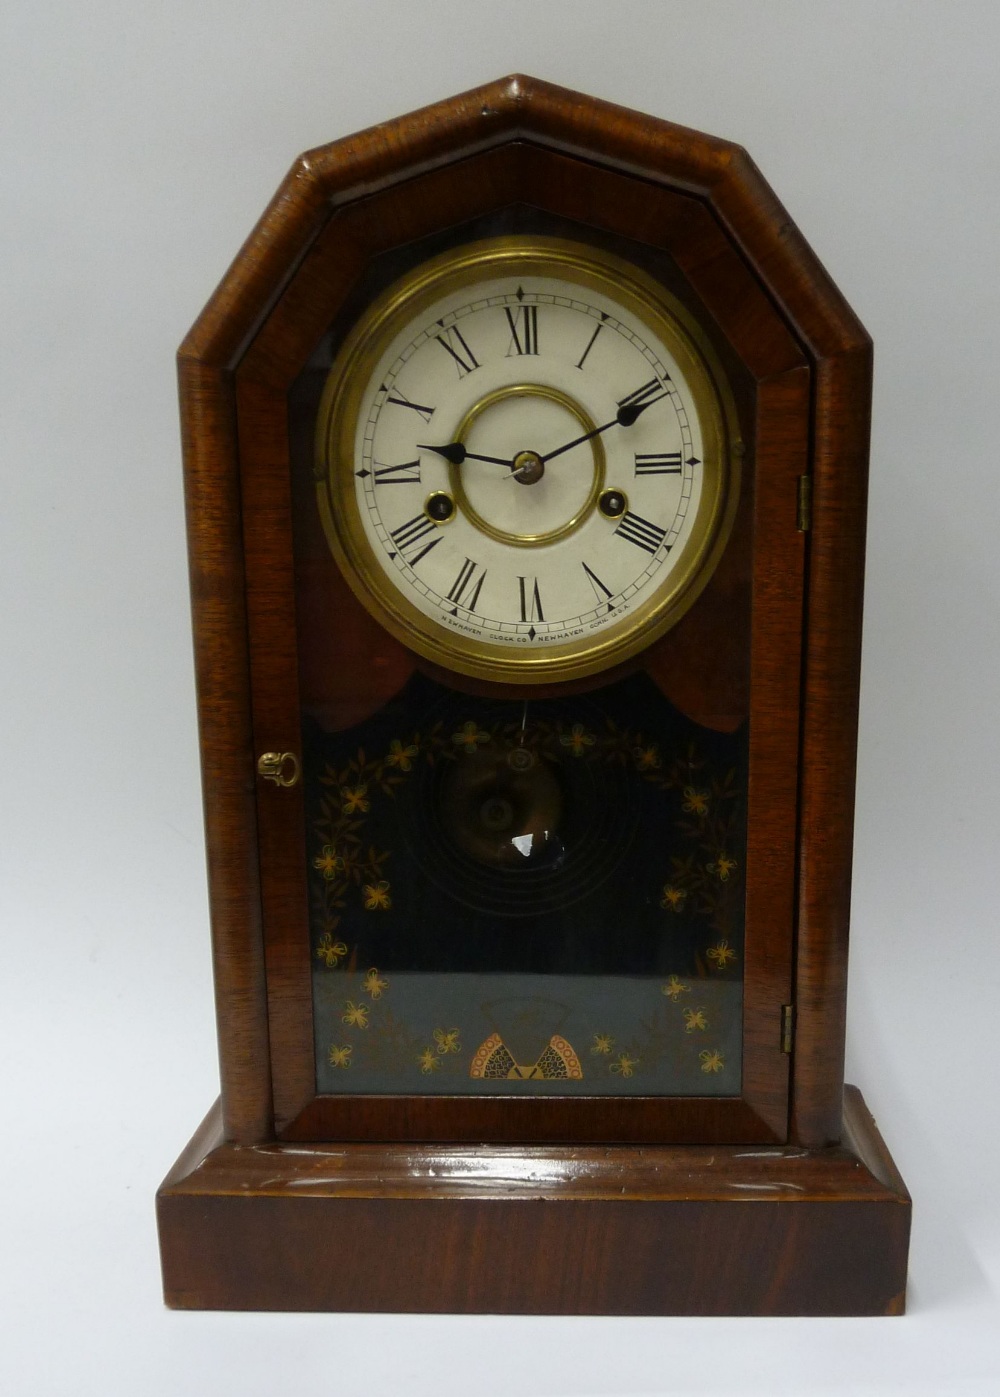 EARLY TWENTIETH CENTURY NEWHAVEN CLOCK CO. AMERICAN MAHOGANY CASED MANTEL CLOCK, the 5" painted